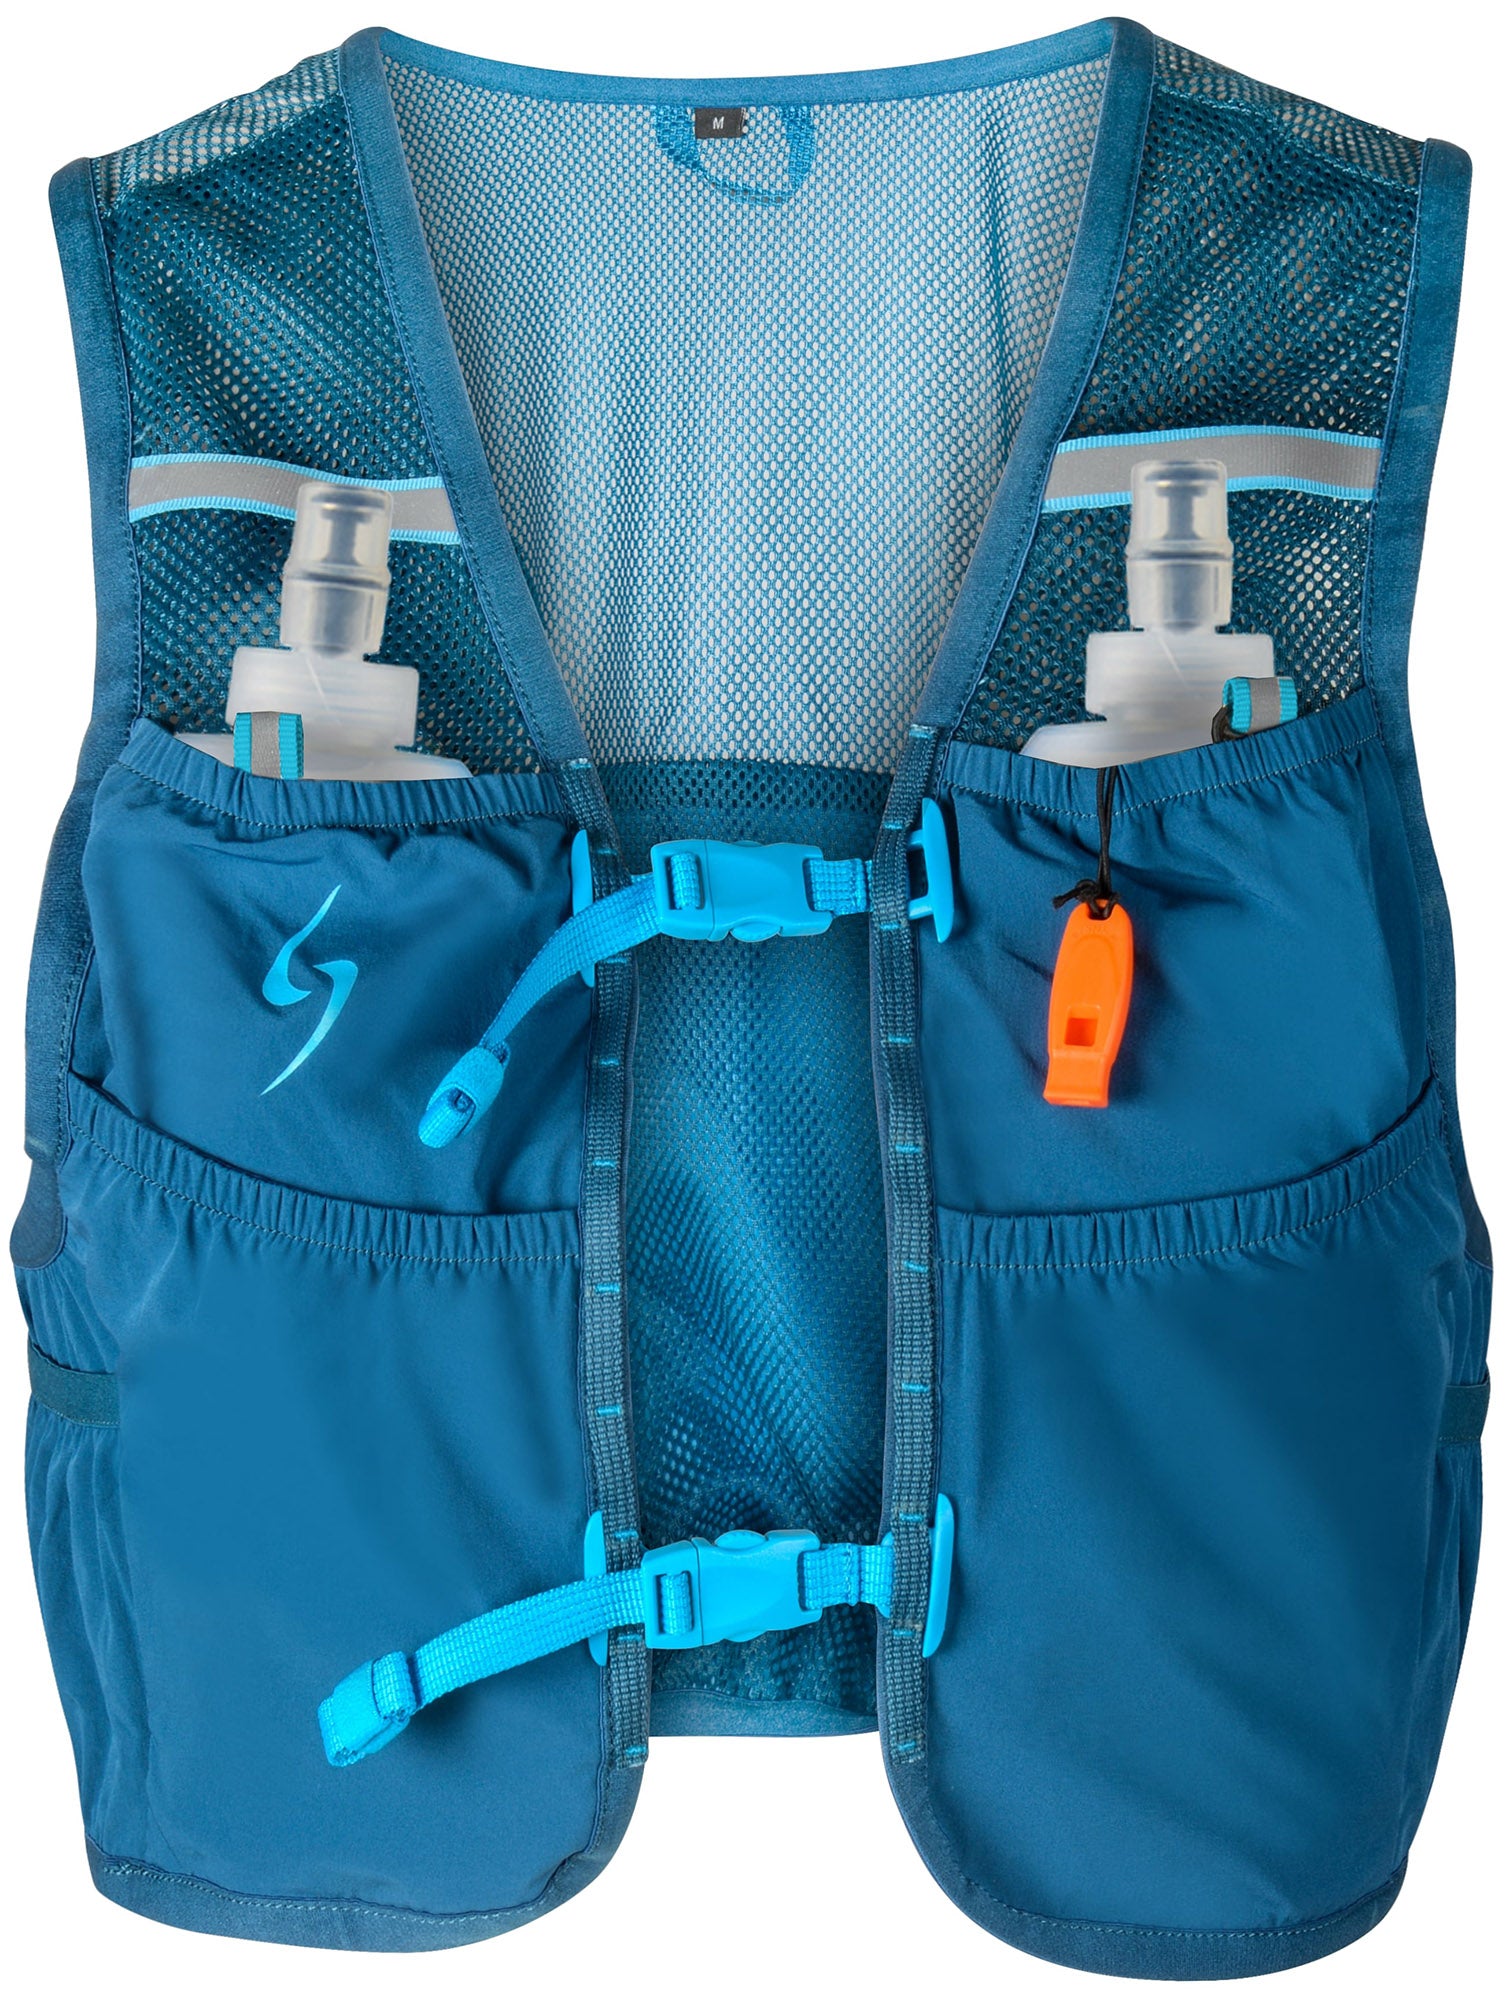 VEST PACK FISHING VEST AND WATER BLADDER BLUE - All Seasons Sports